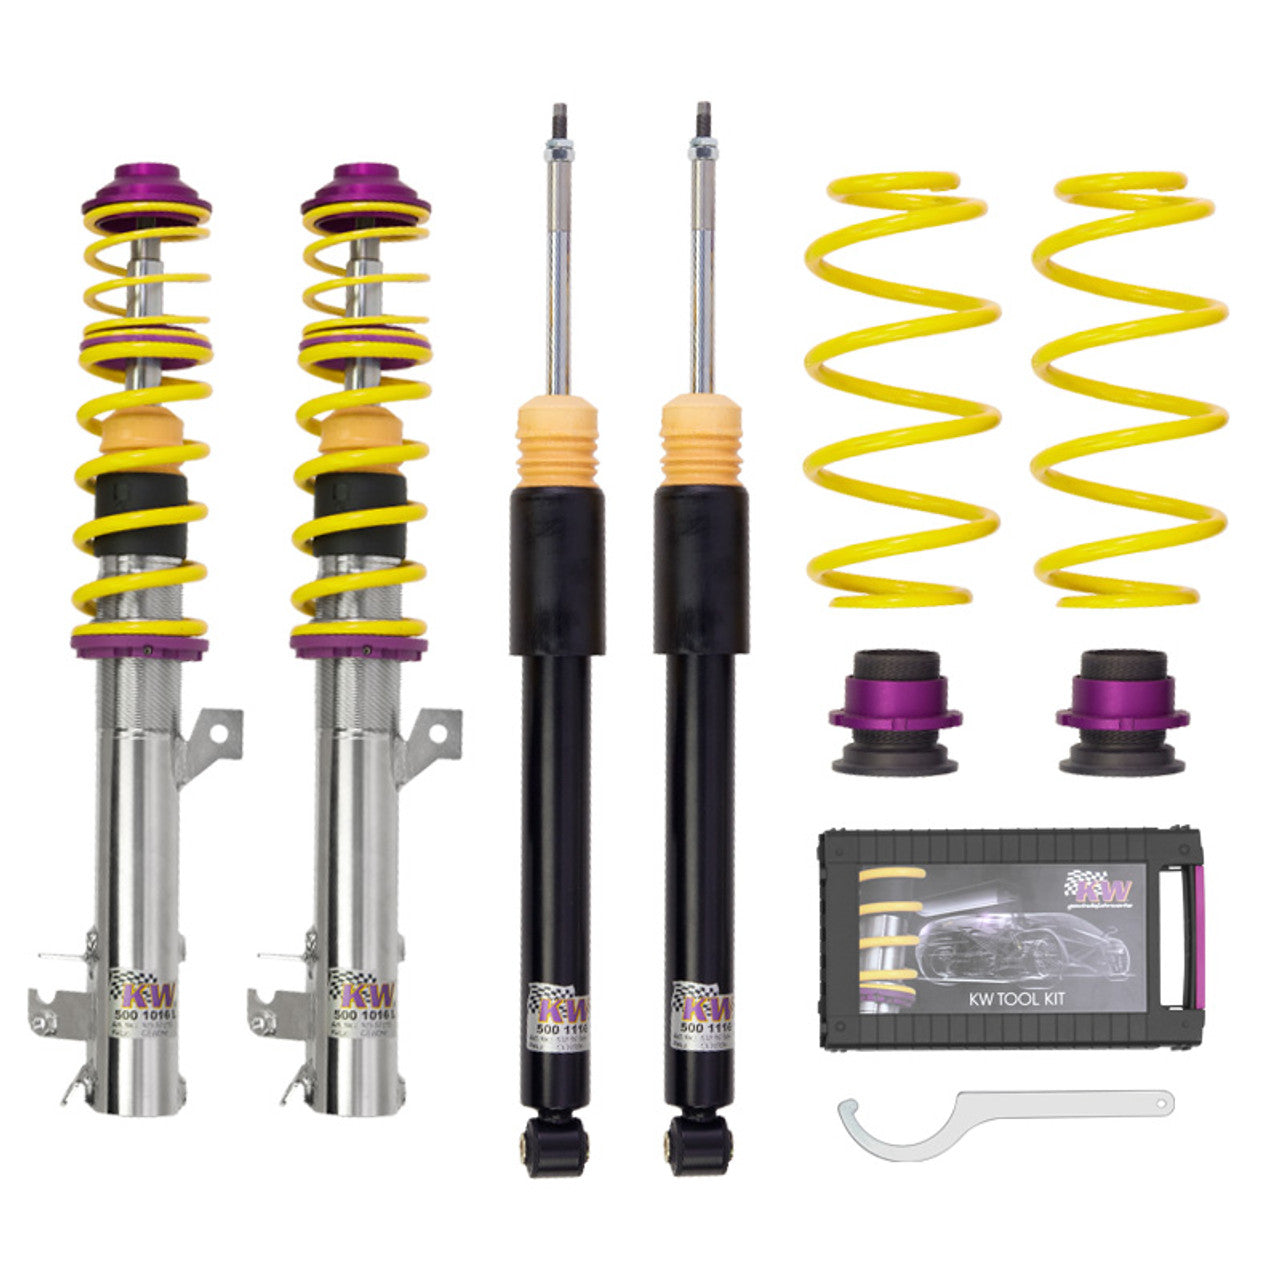 KW Variant 1 Coilovers - Tiguan Mk2 without electronic dampers